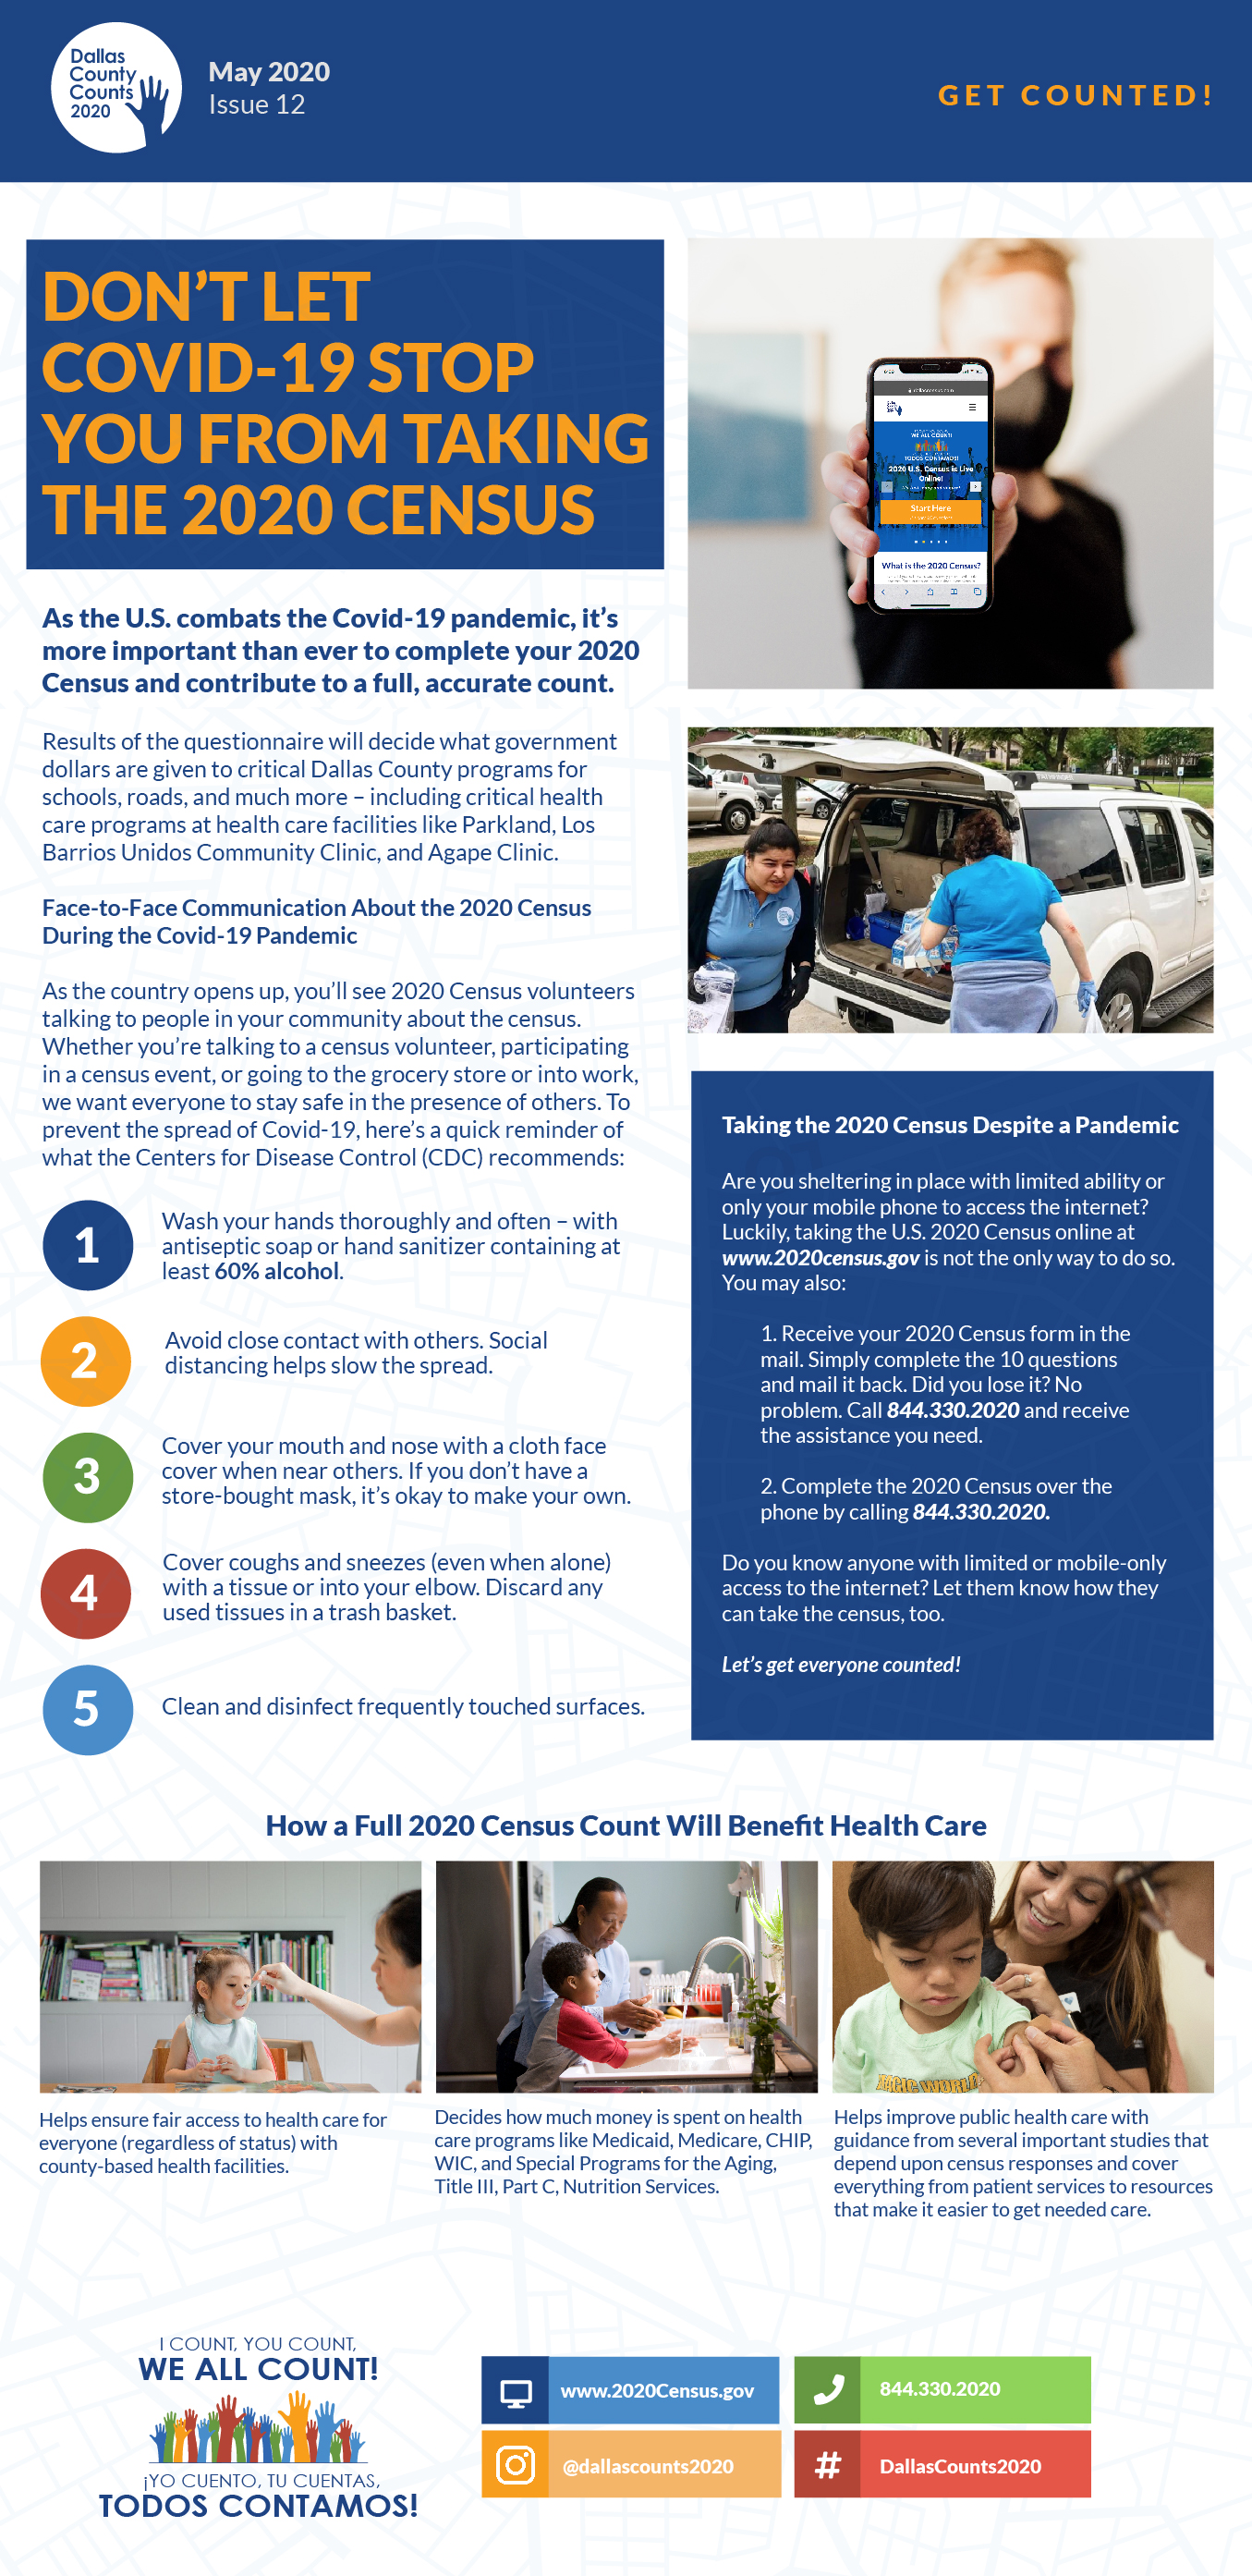 May 2020 Census flyer